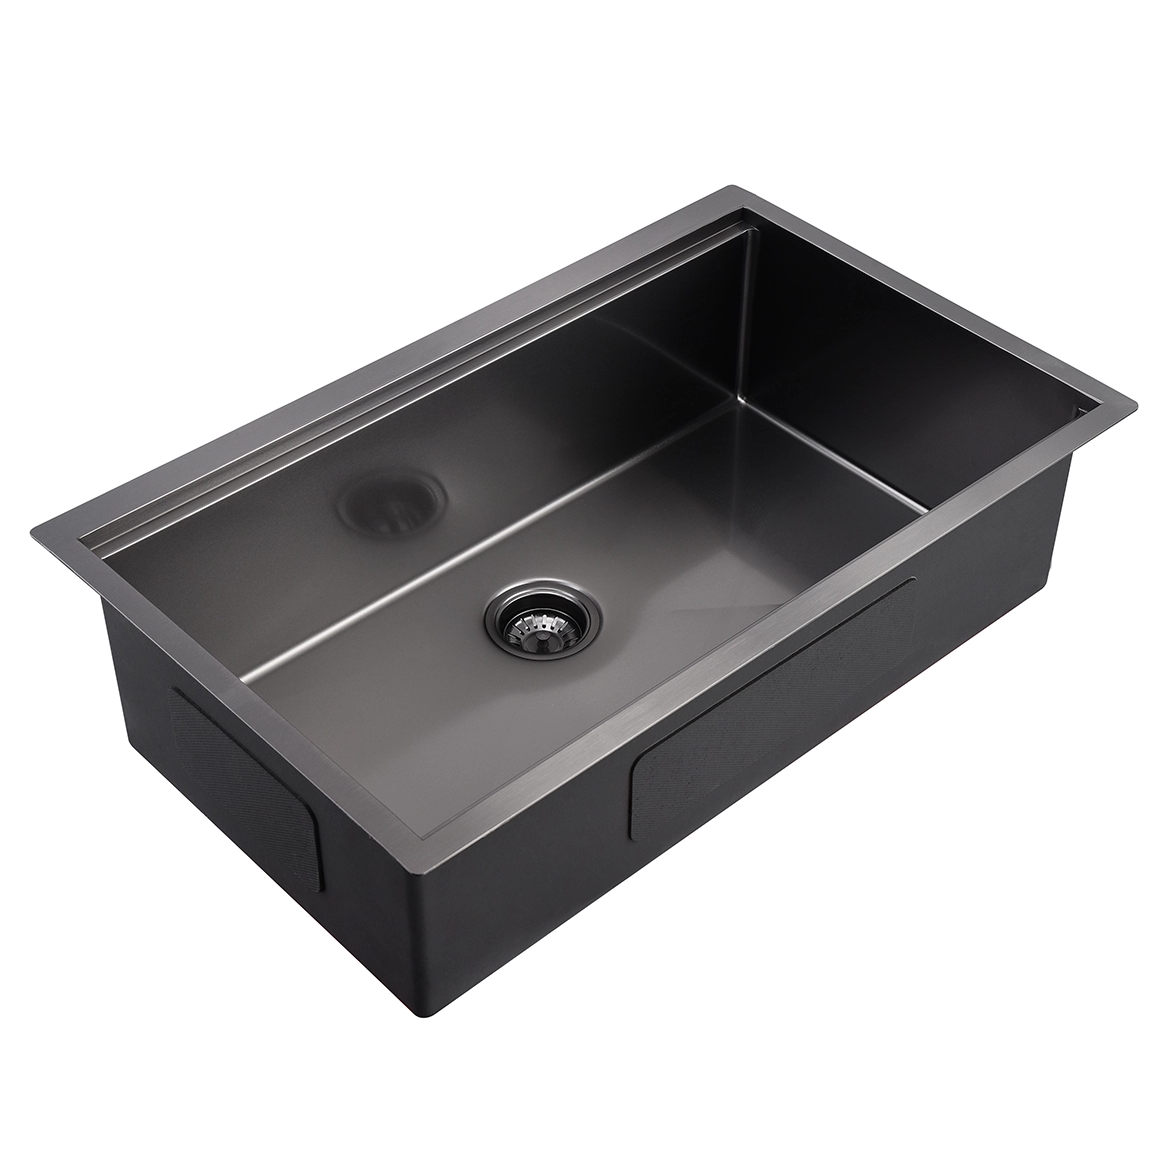 China factory 32 inch 304 Stainless Steel Handmade Undermount Gunmetal Black PVD Nano Kitchen Sink with Ledge